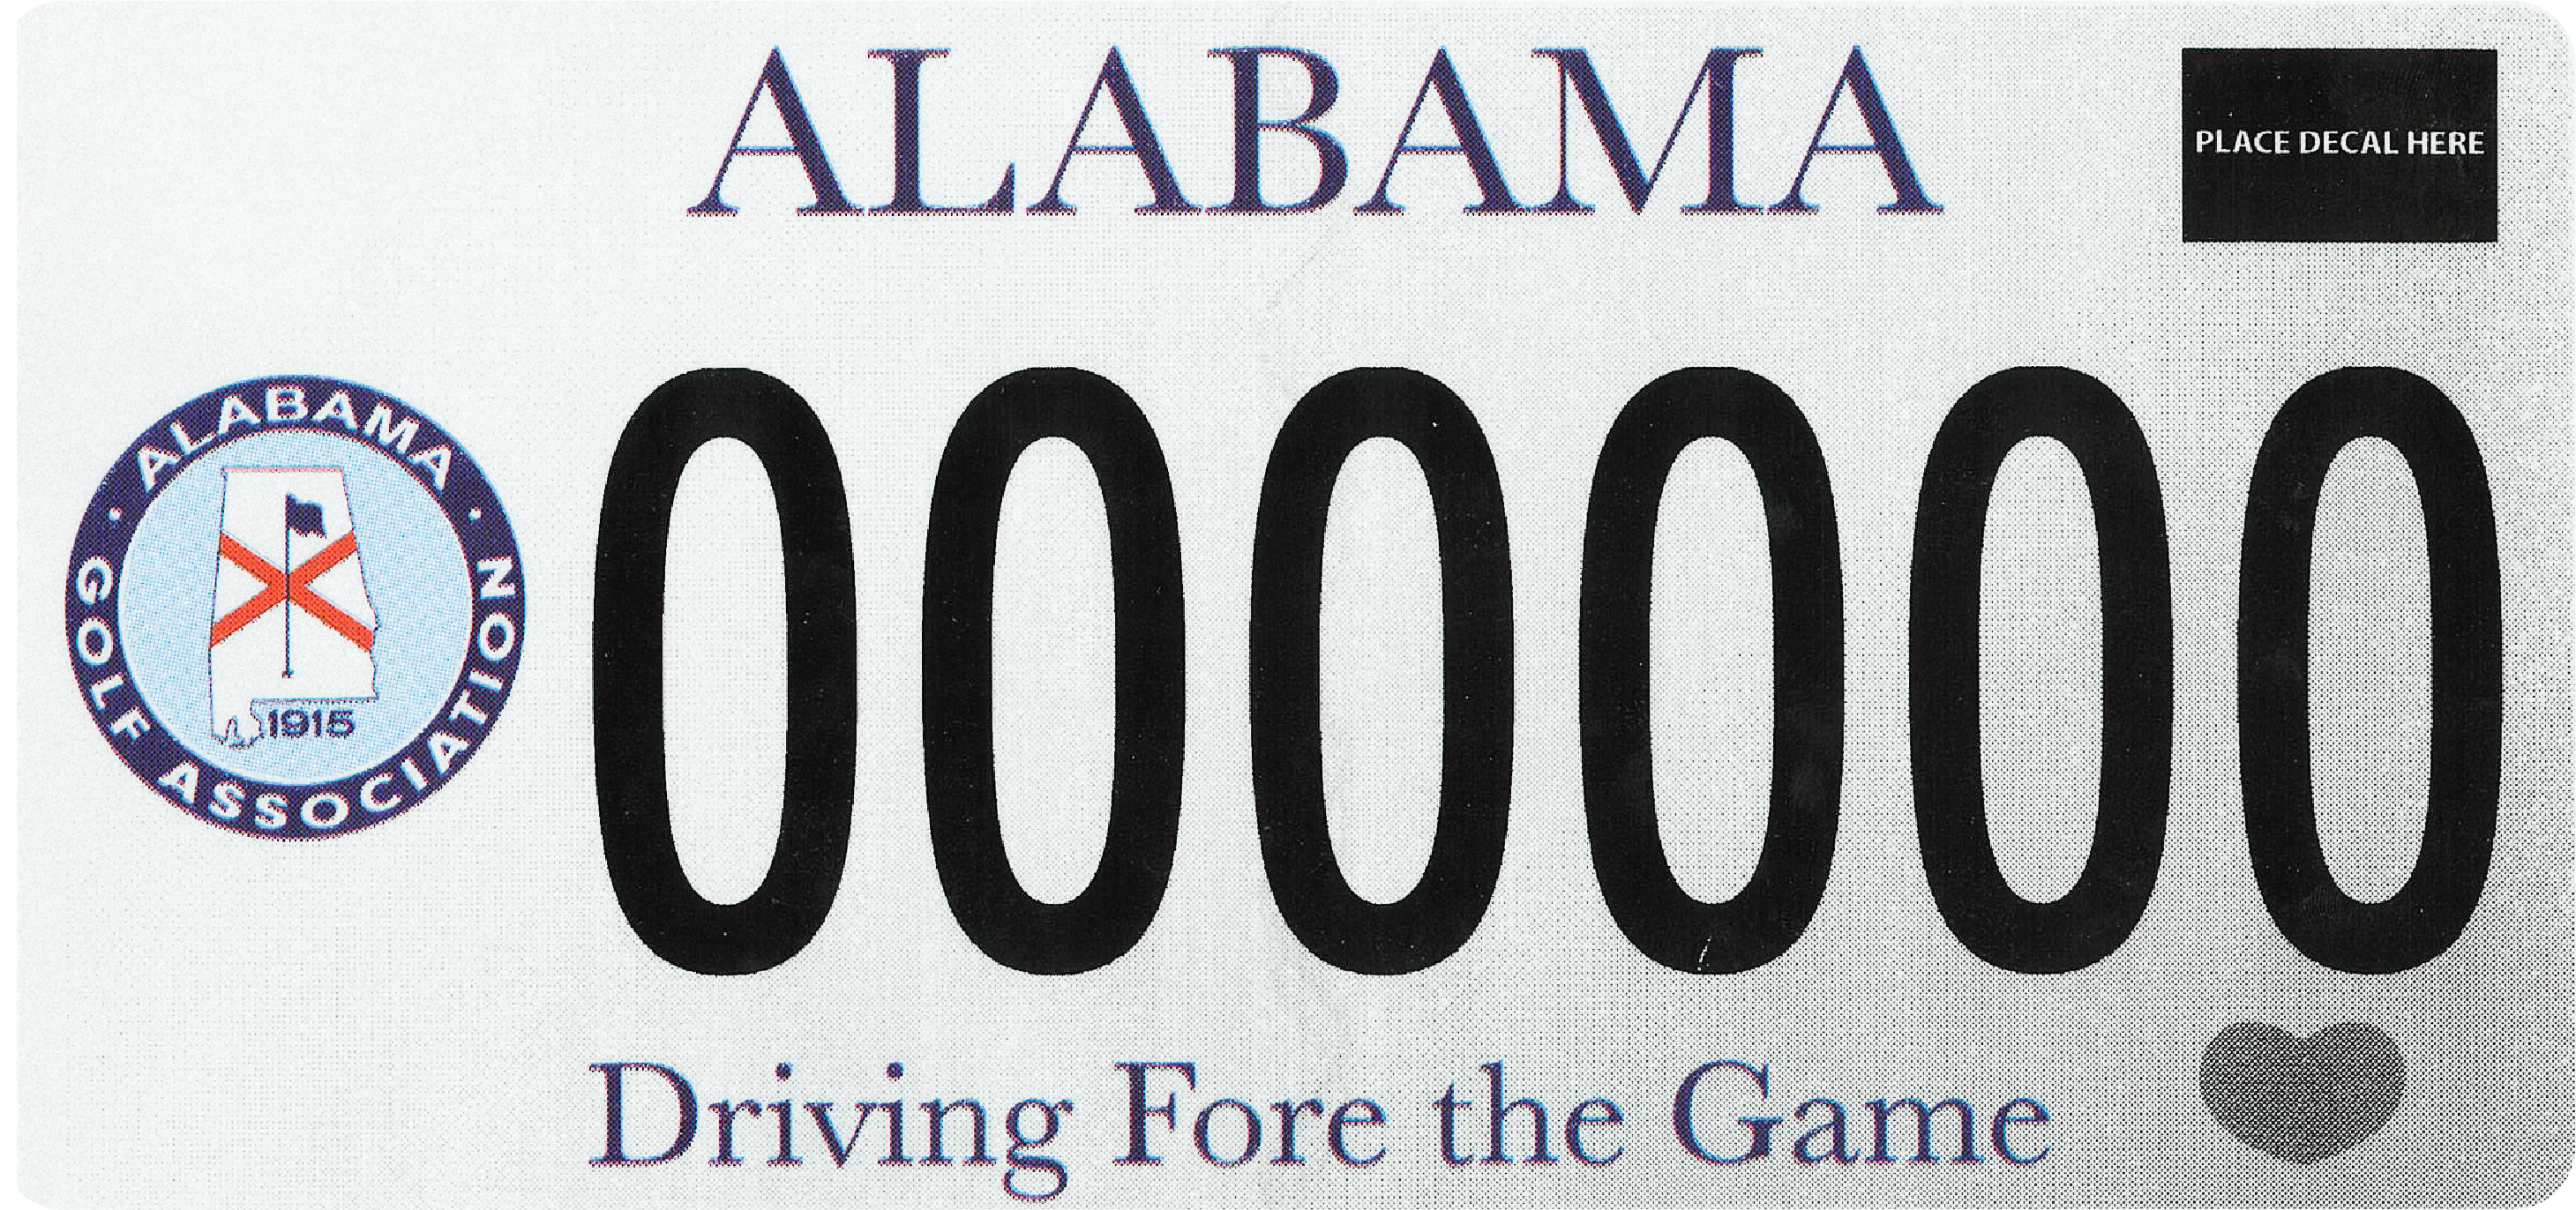 Alabama’s Only Golf License Plate 